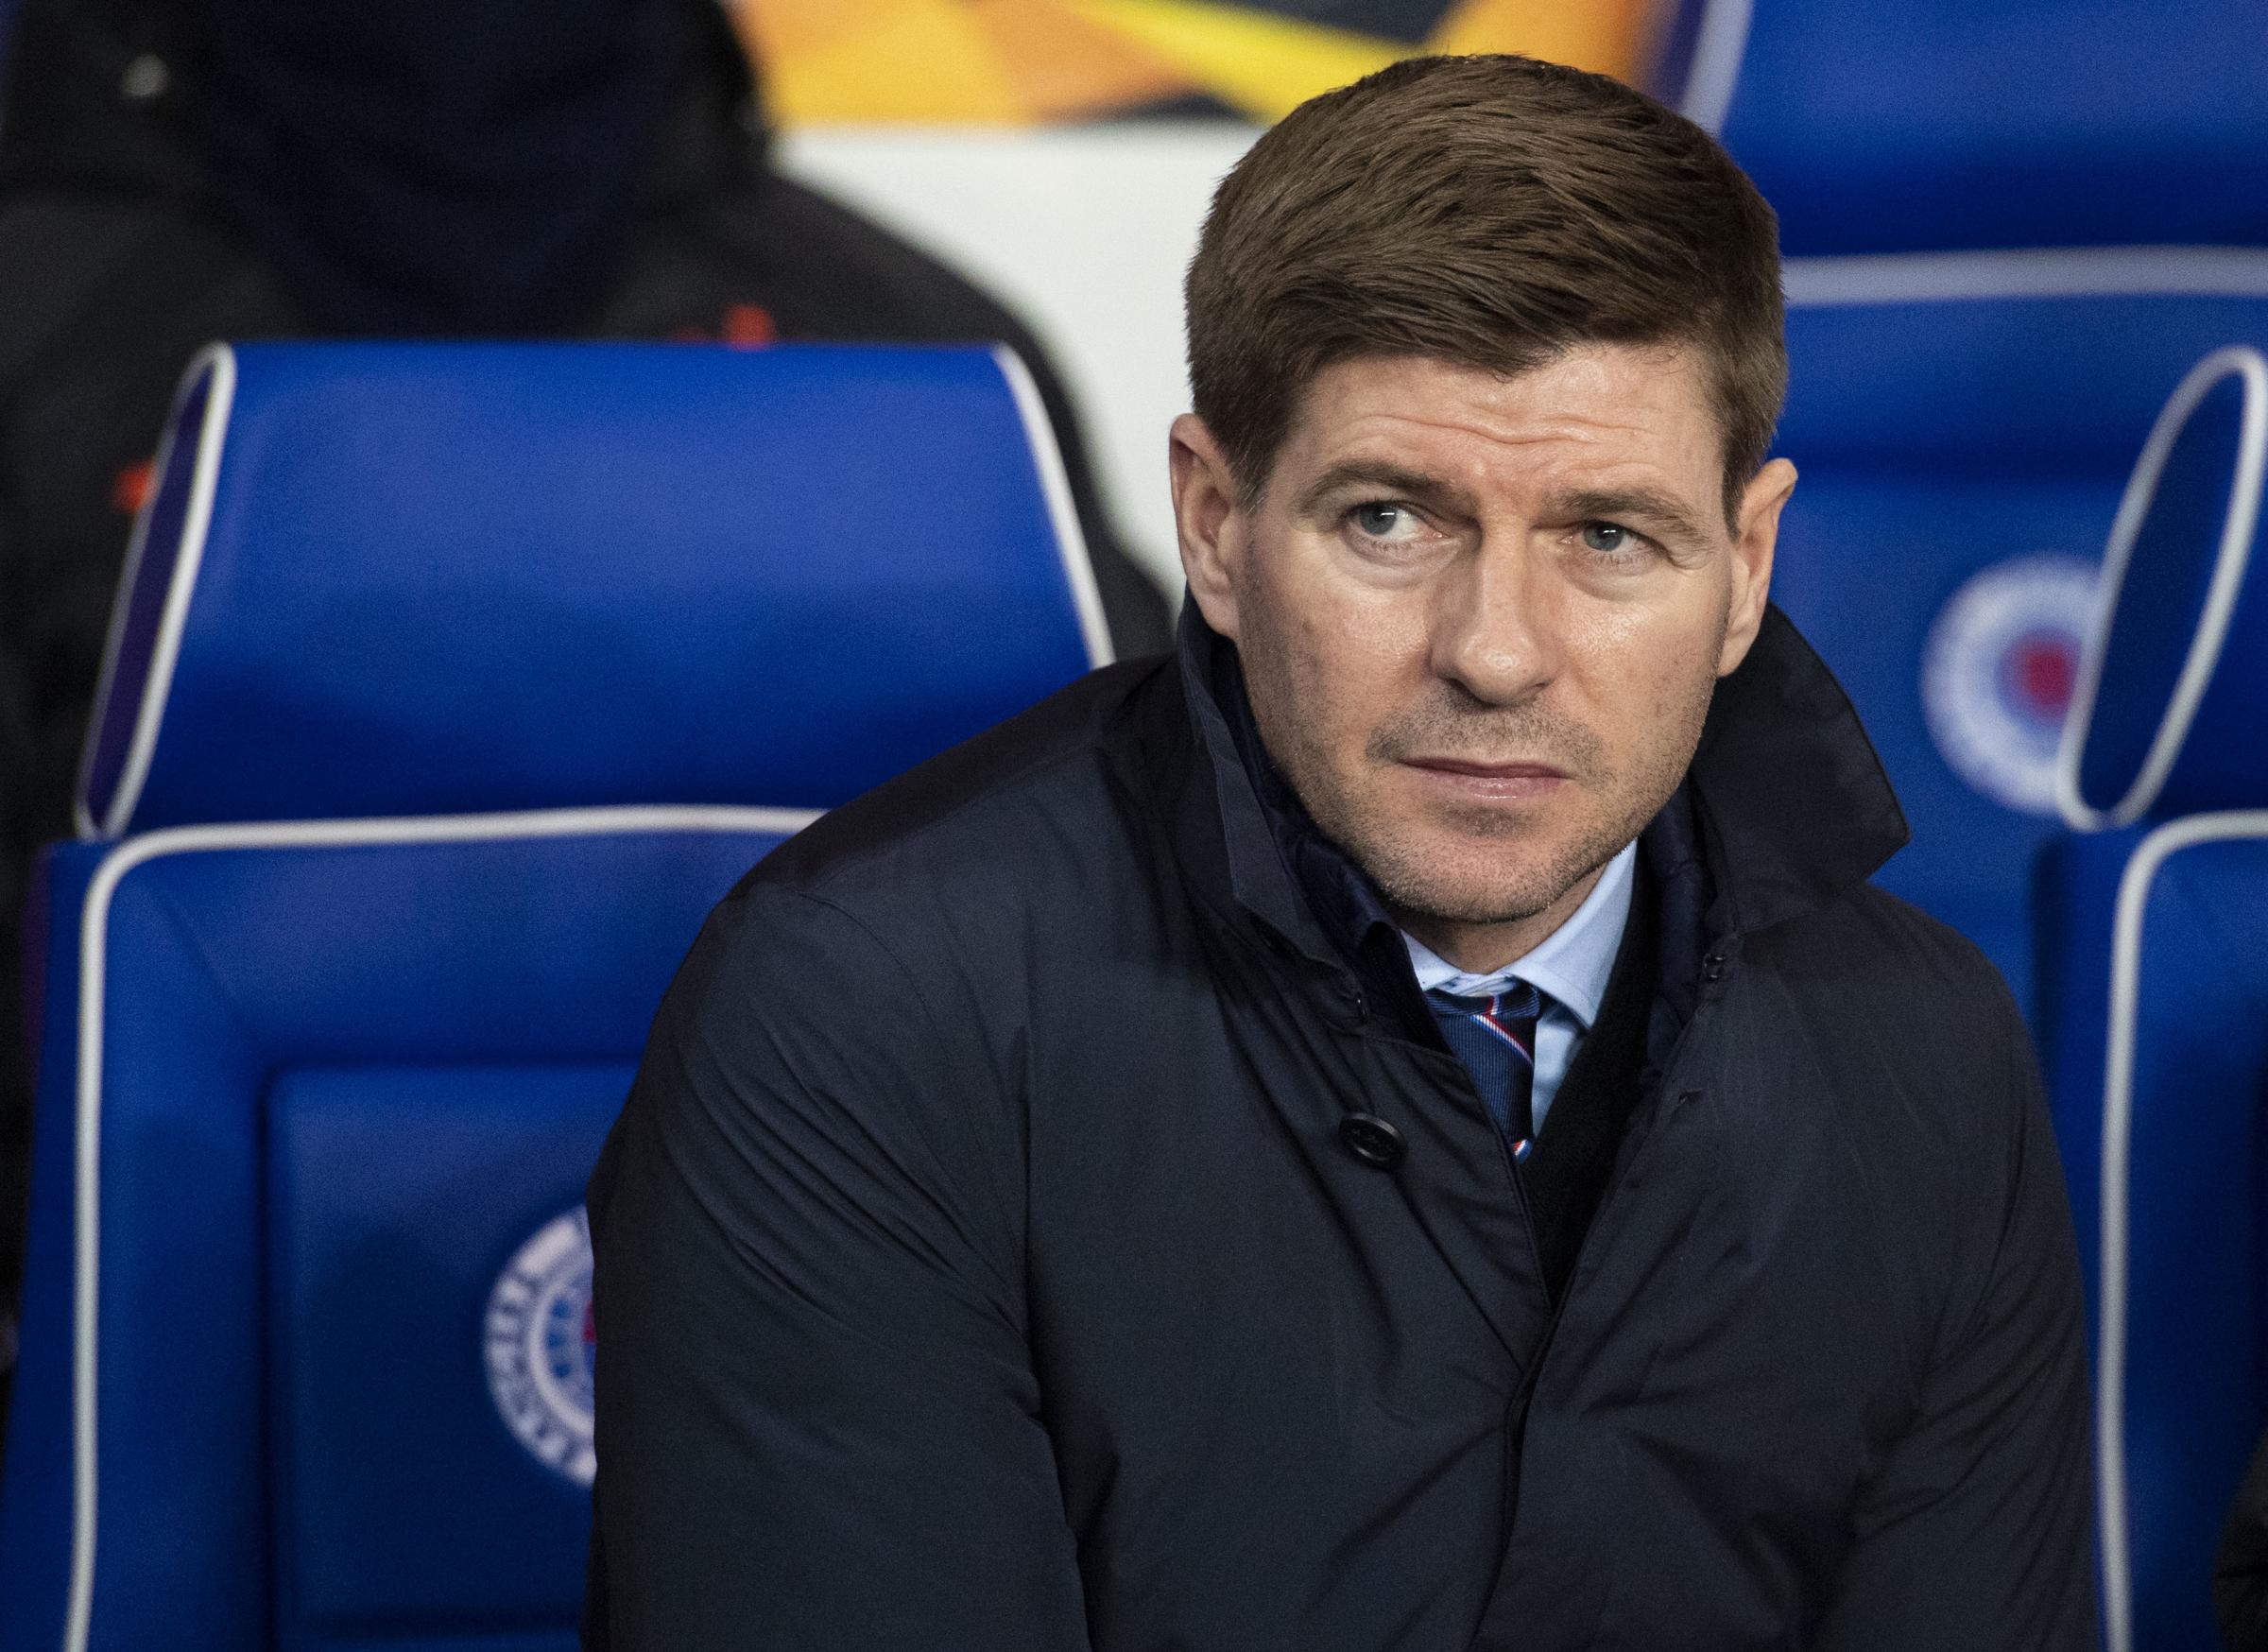 Steven Gerrard's Europa League warning to Rangers after Champions League exit